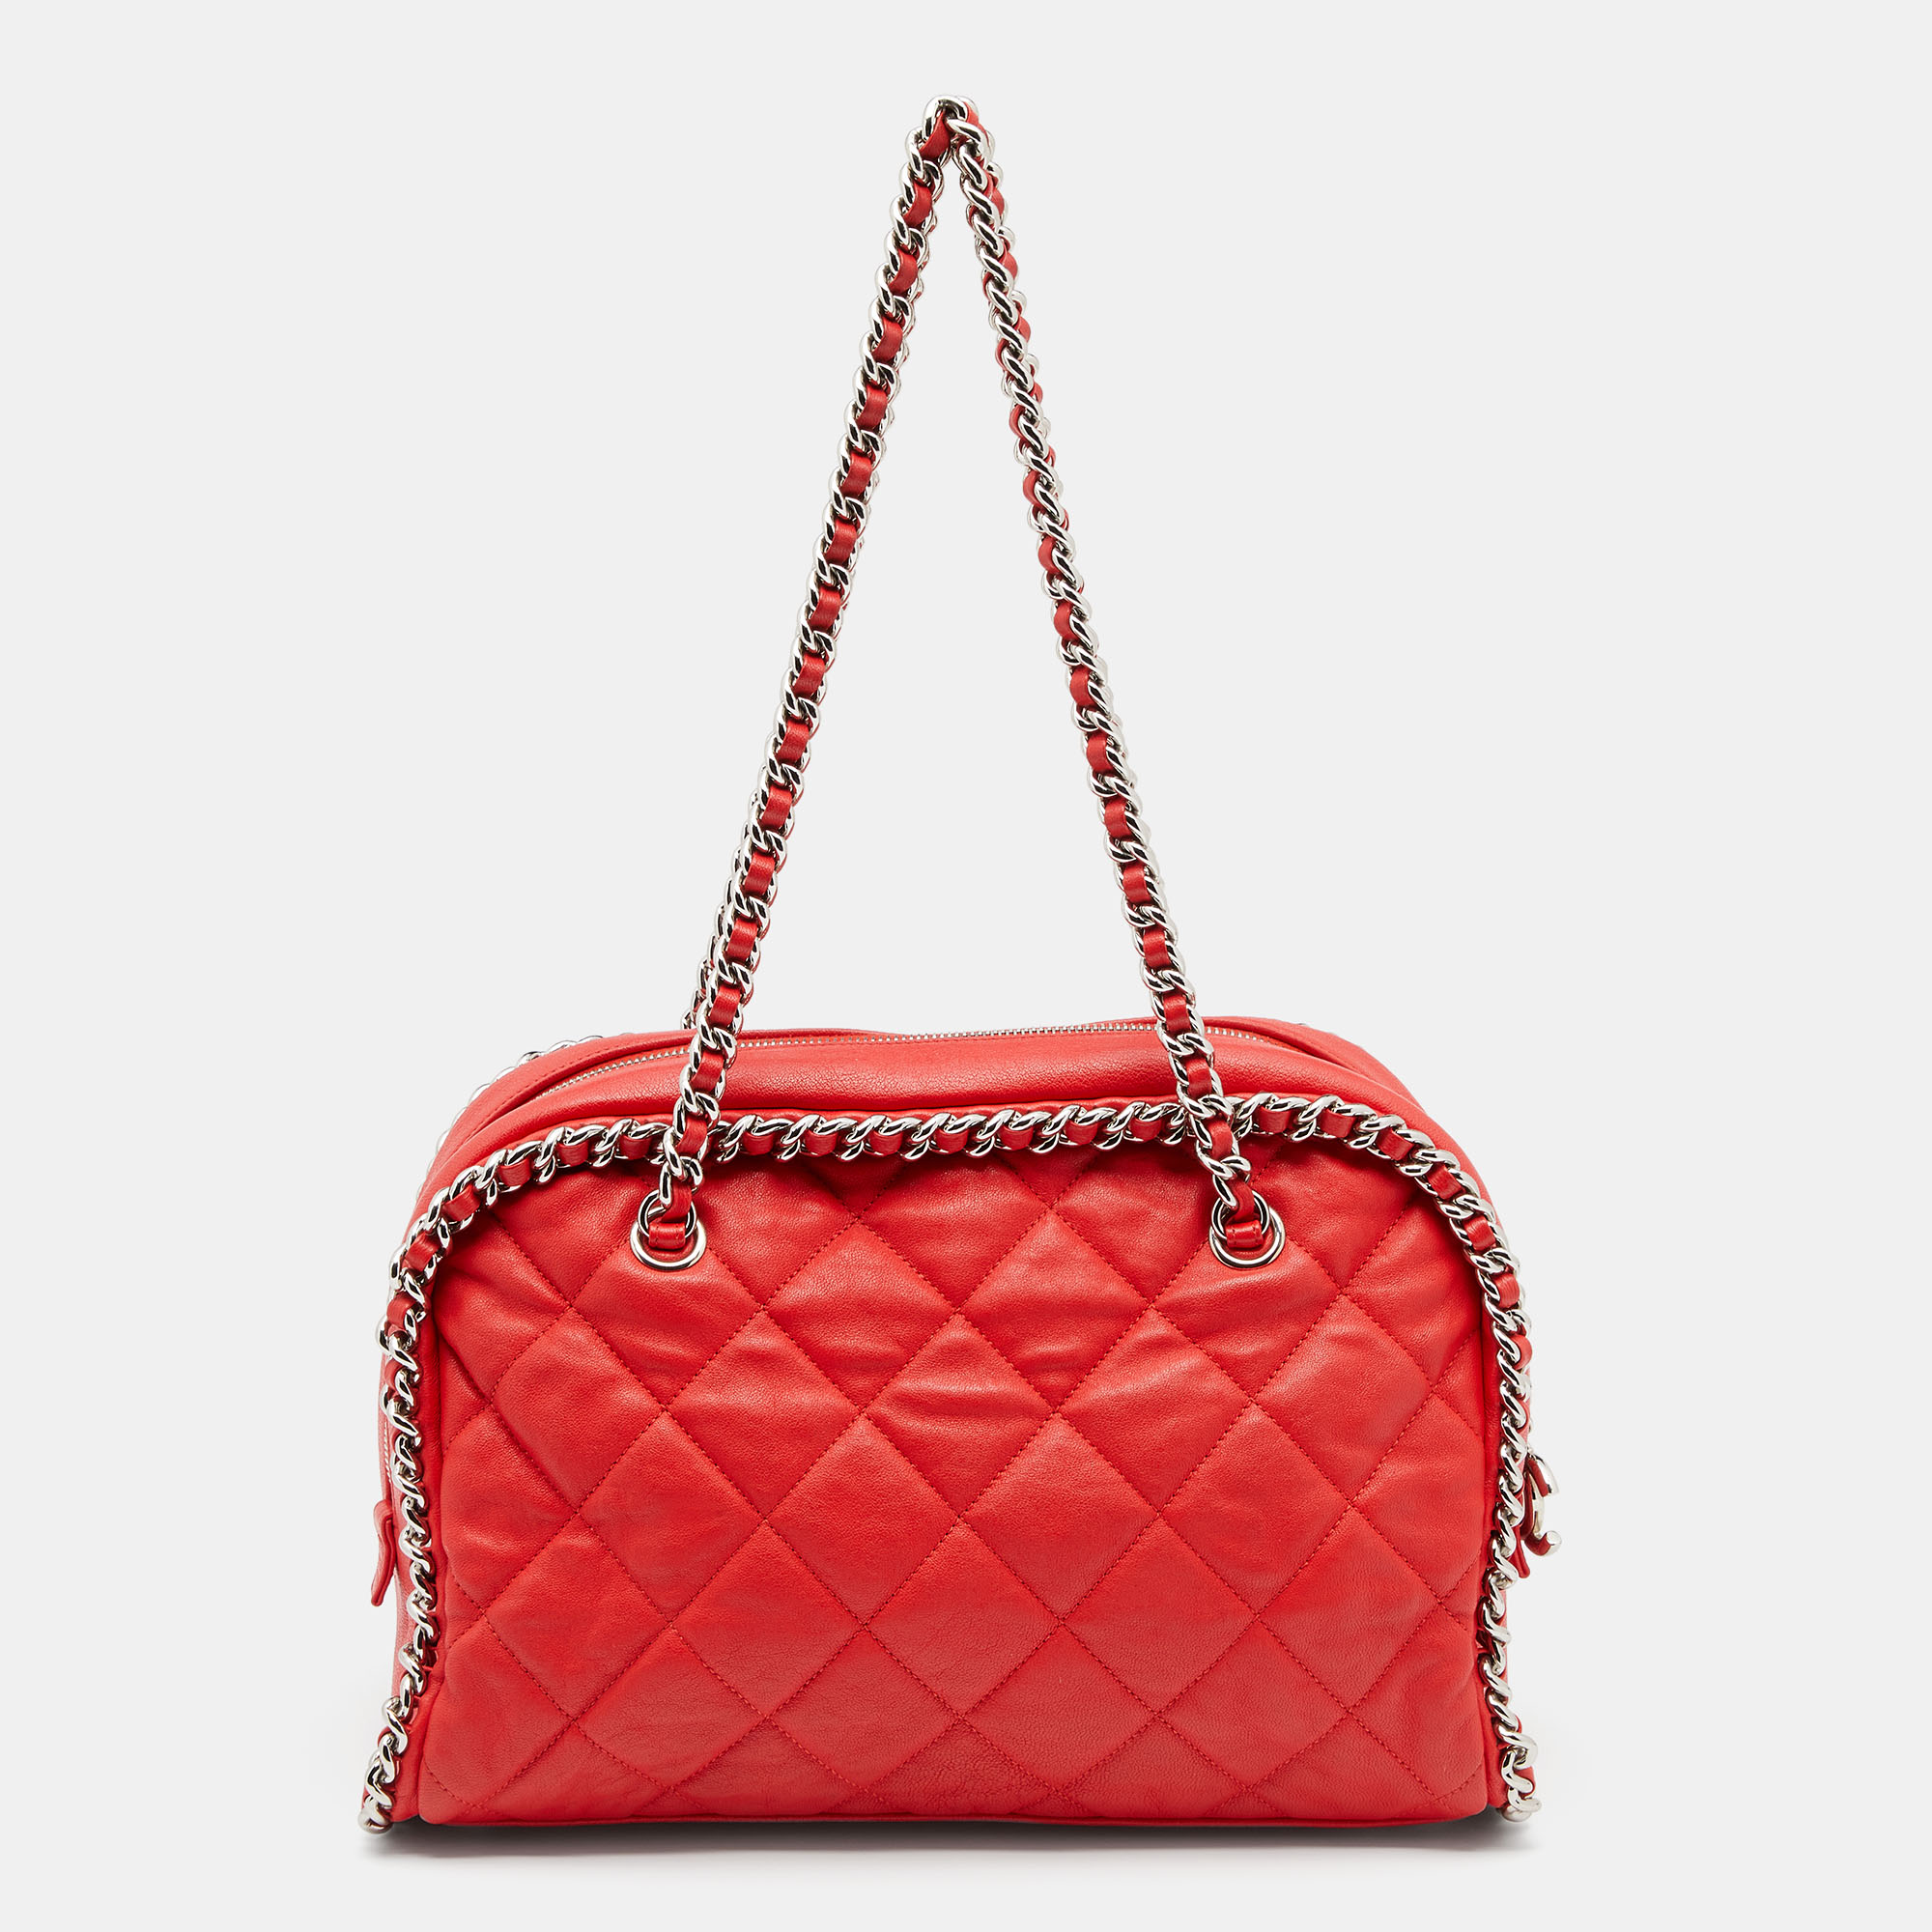 Chanel Red Quilted Leather Chain Around Bowler Bag